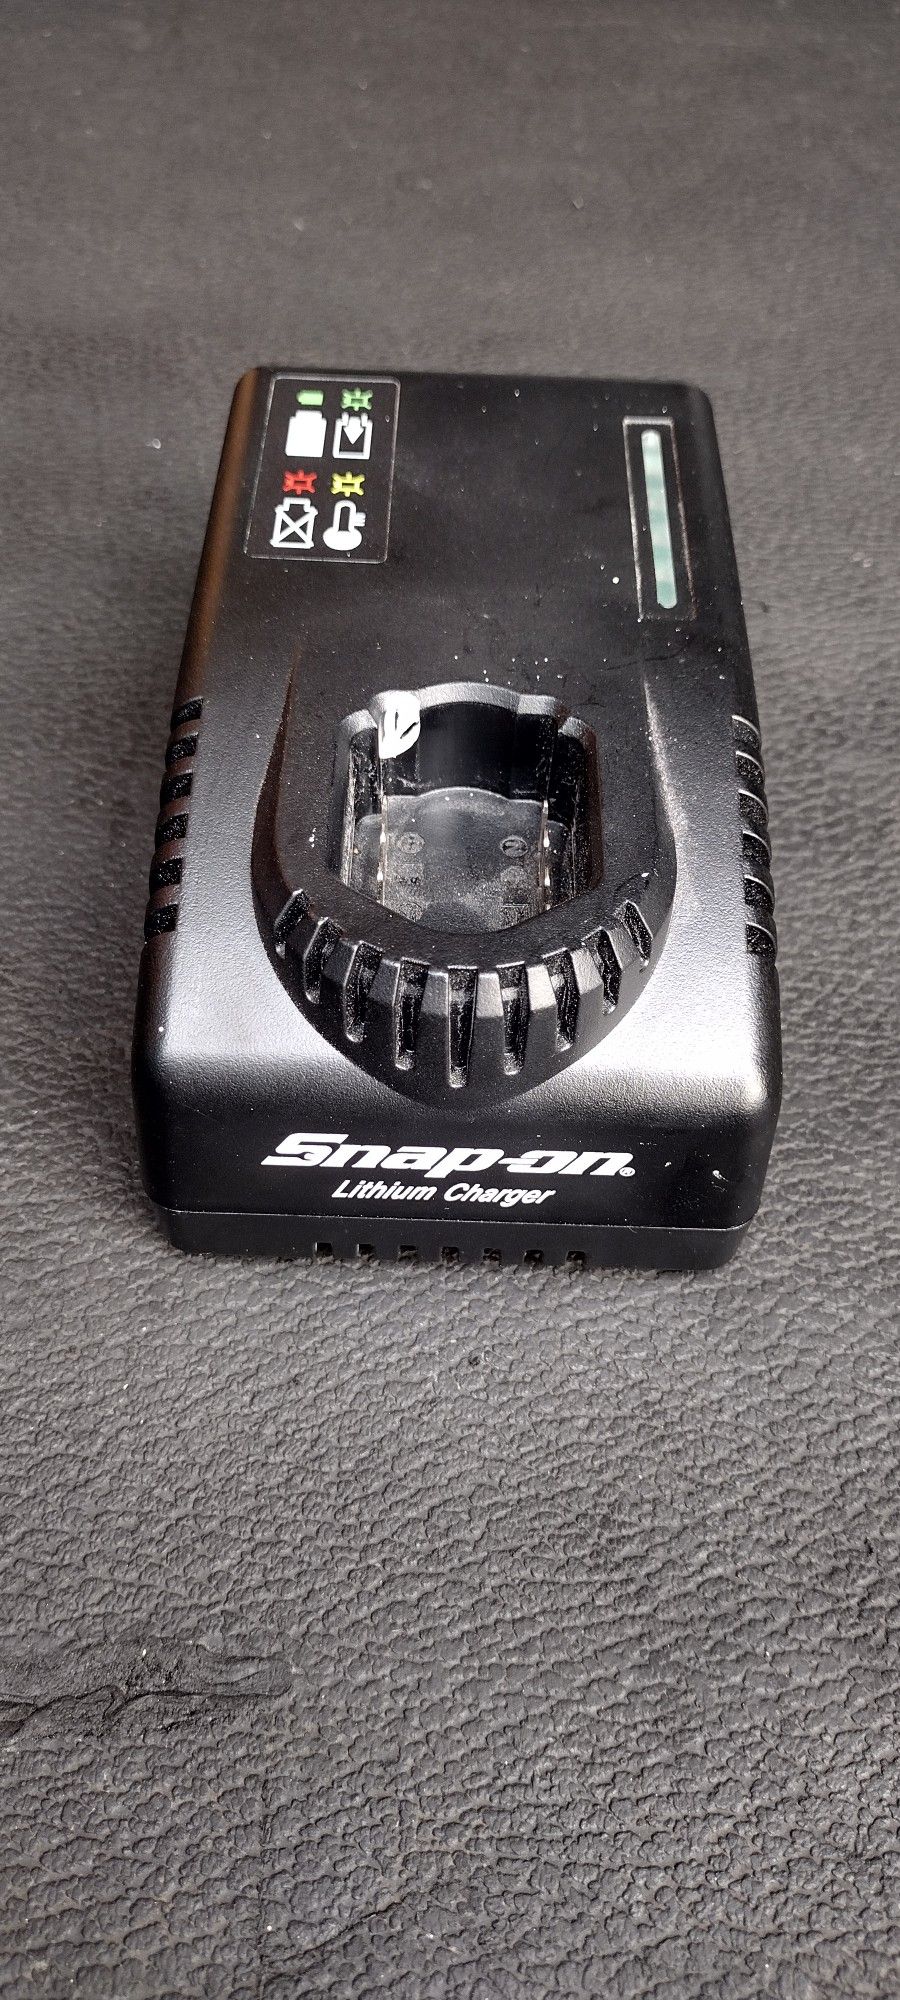 Snap On 14.4v Lithium Battery Charger $10